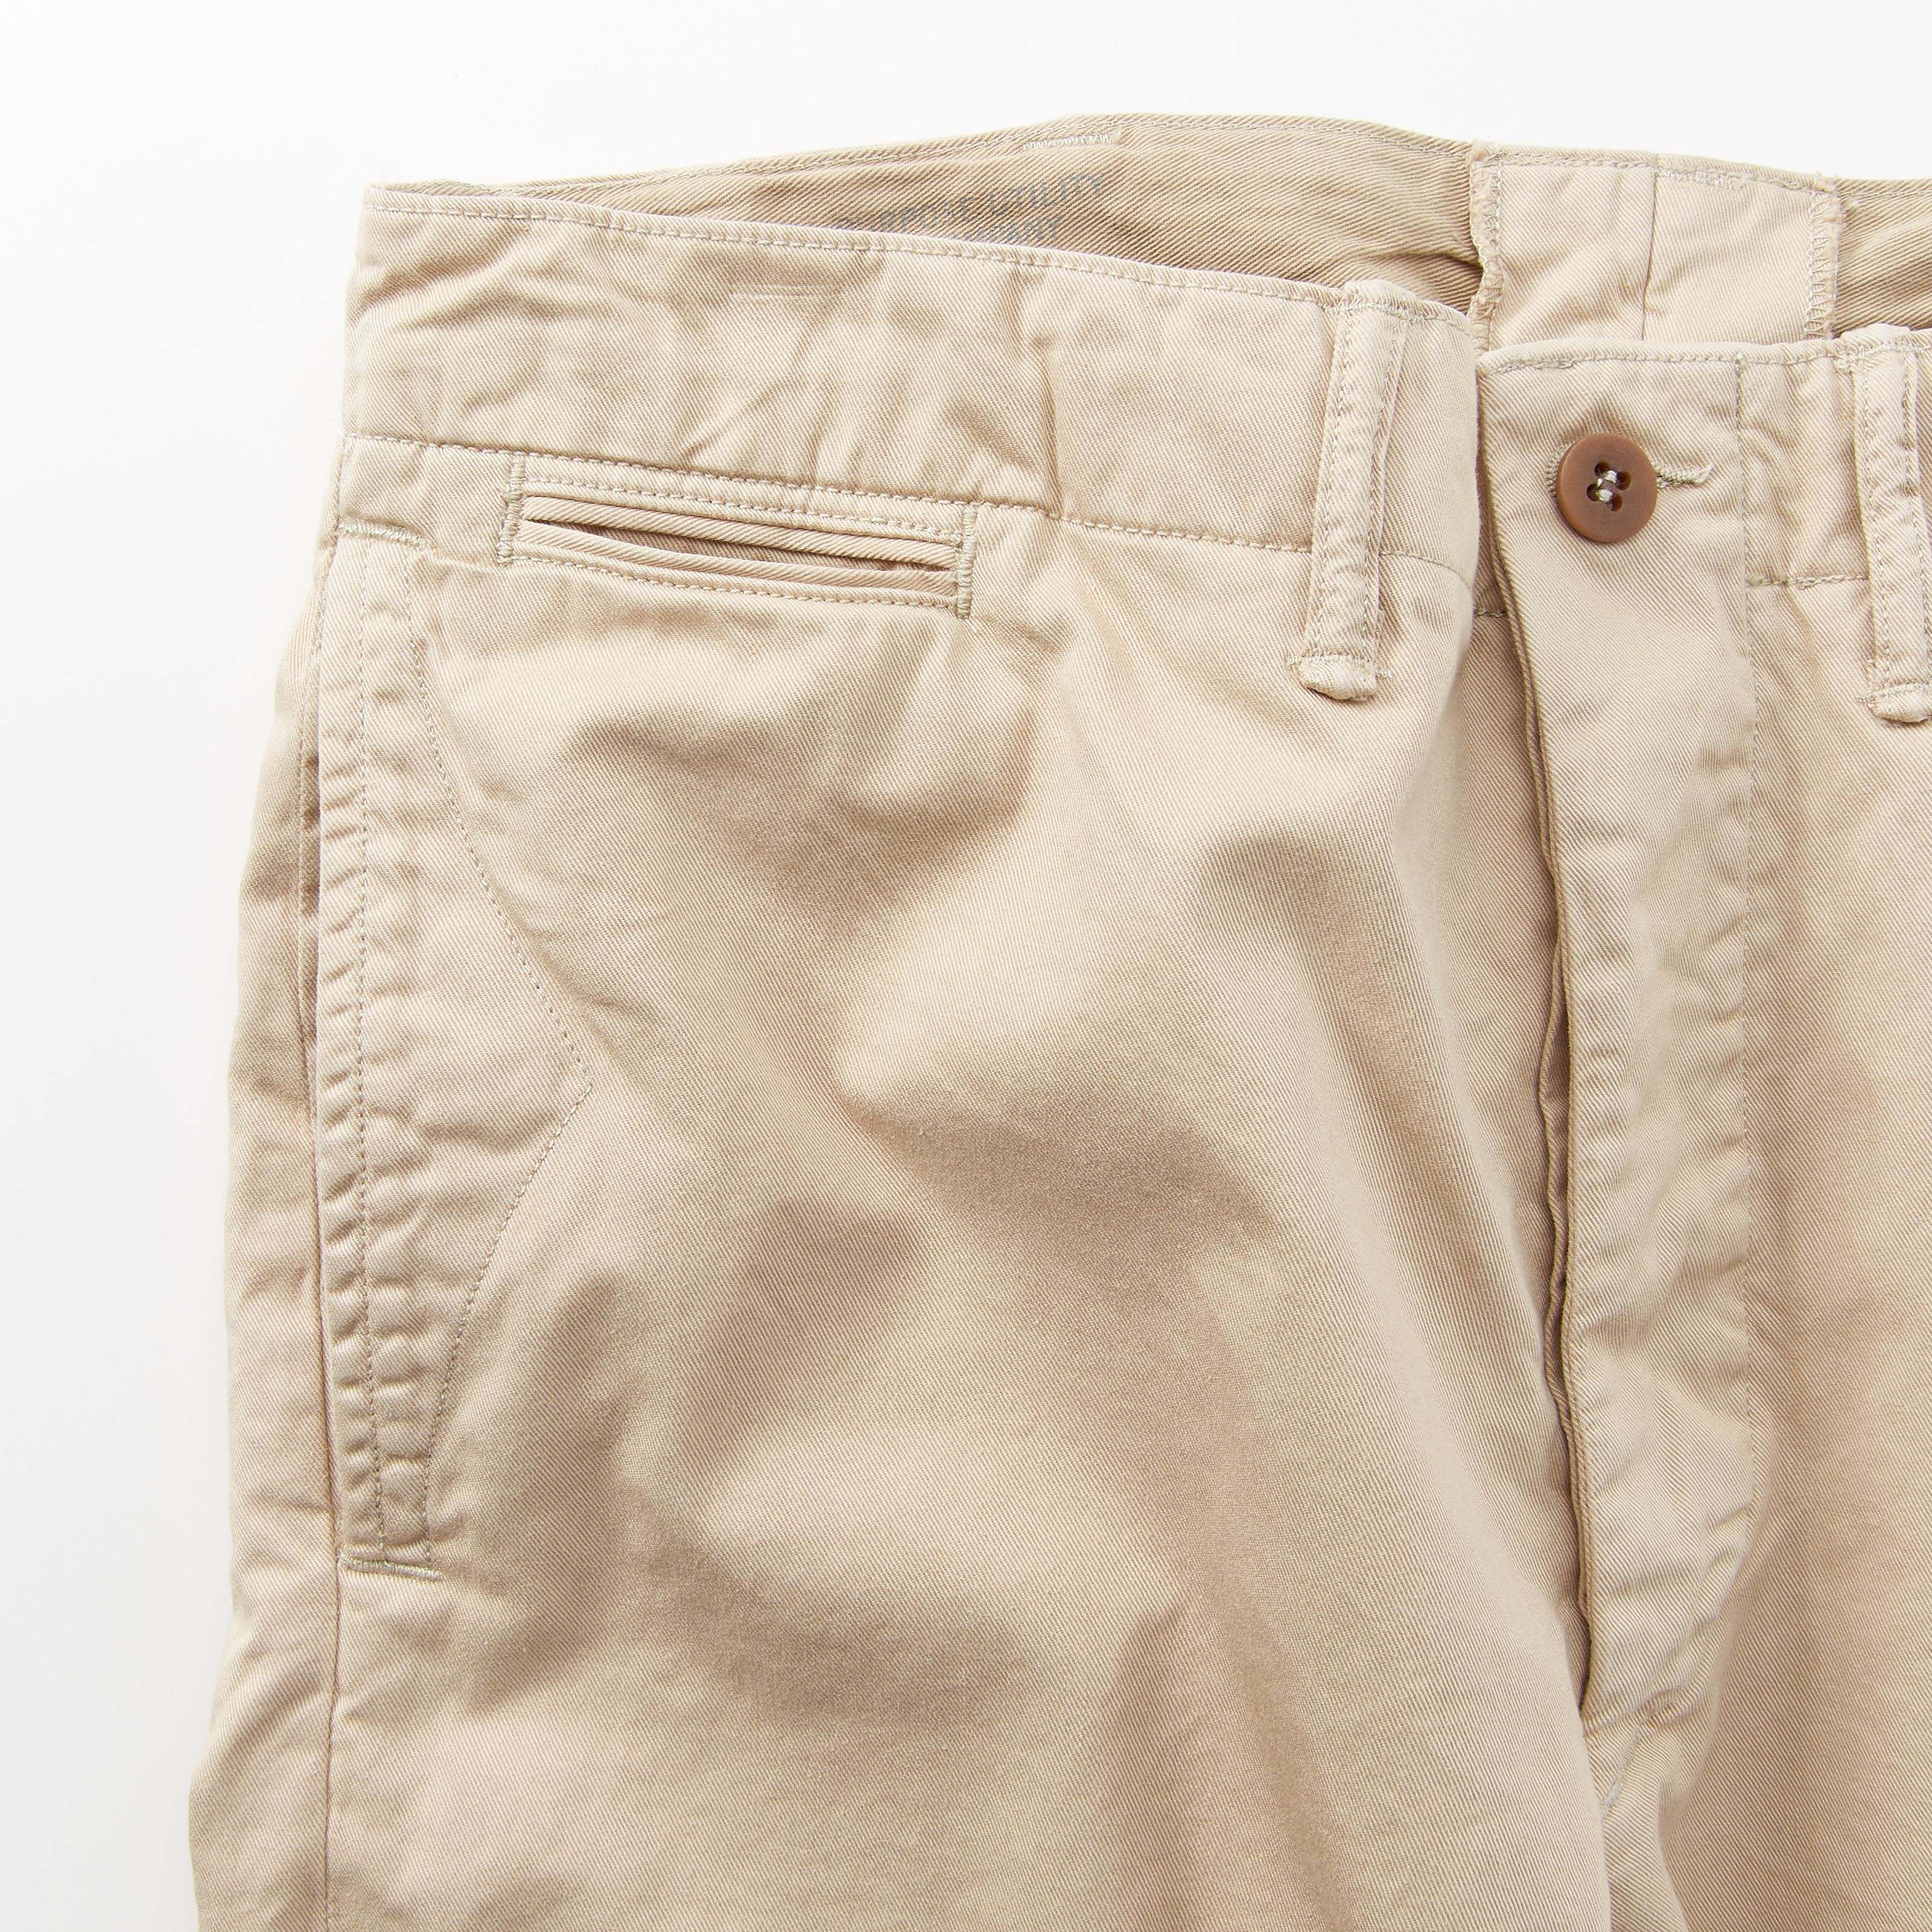 Cotton Twill Officer's Chino